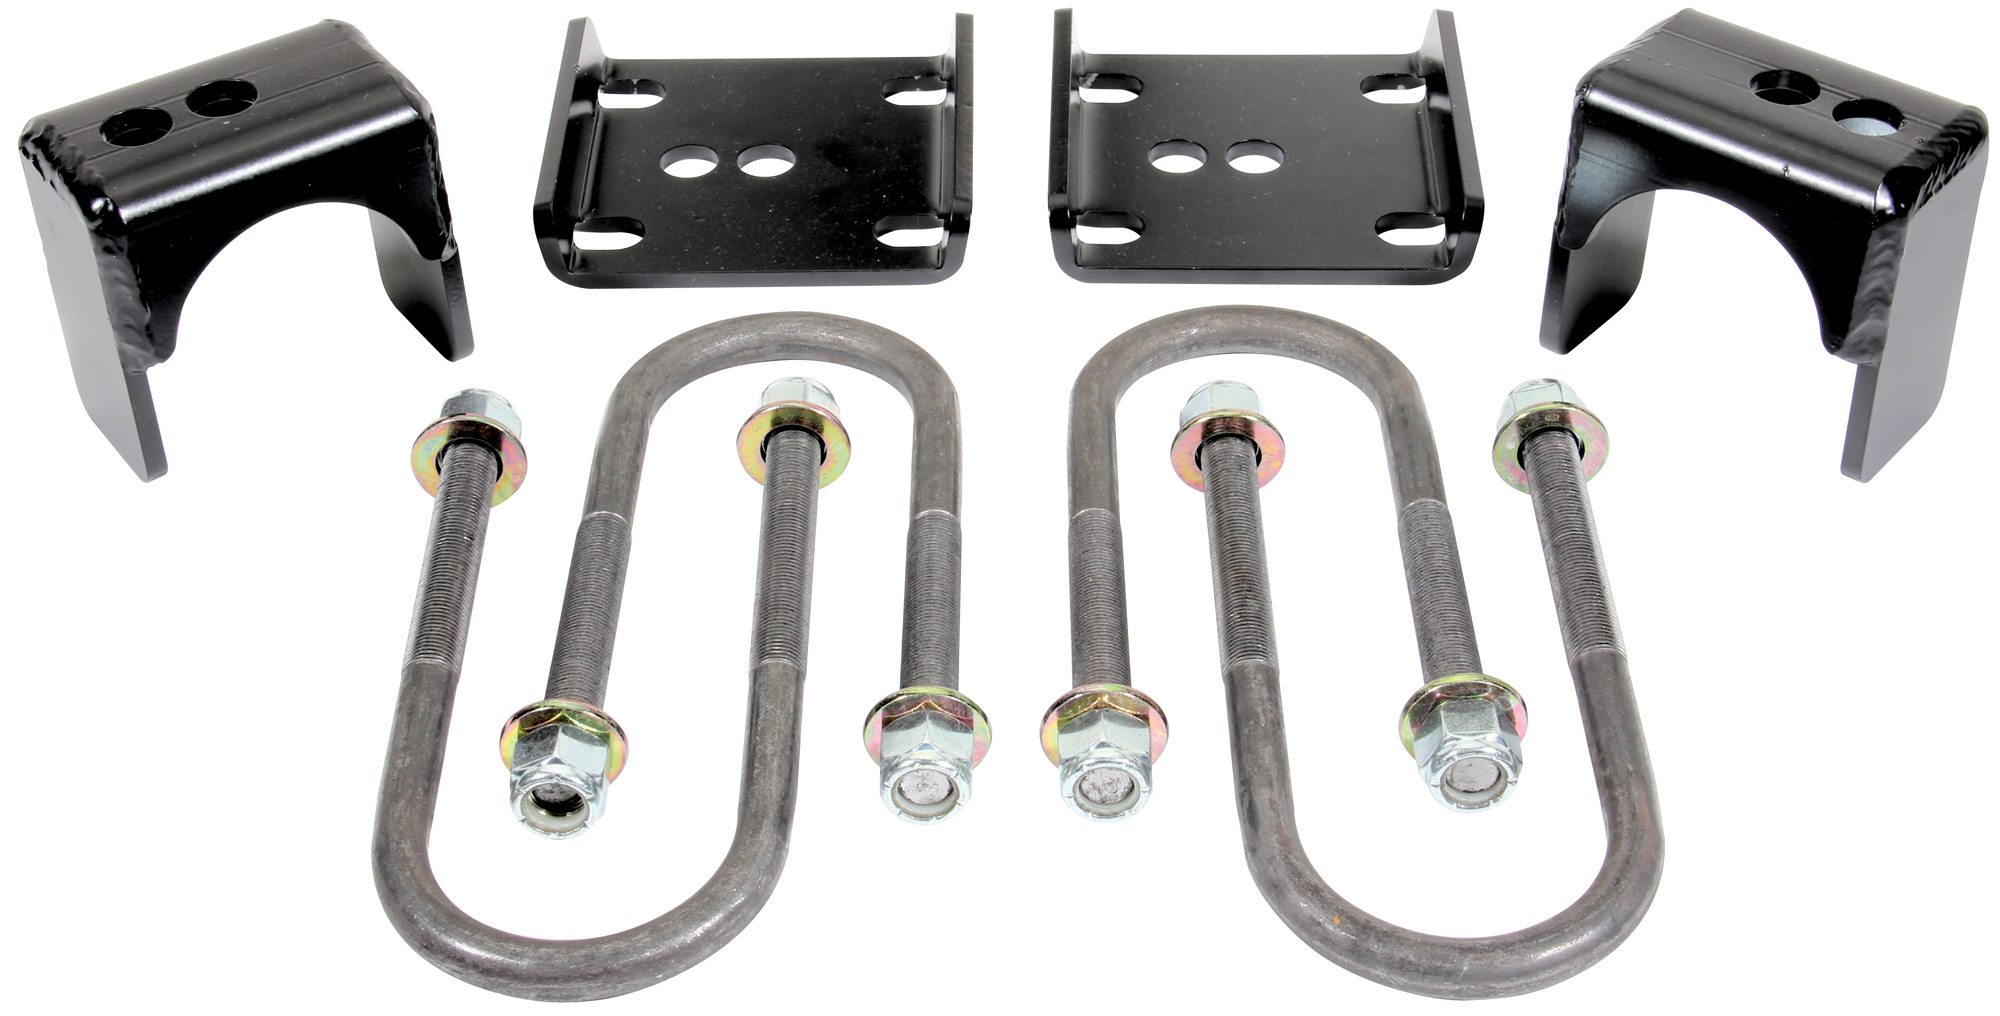 This rear axle flip kit will allow you to lower the rear of your 1973-87 C1...